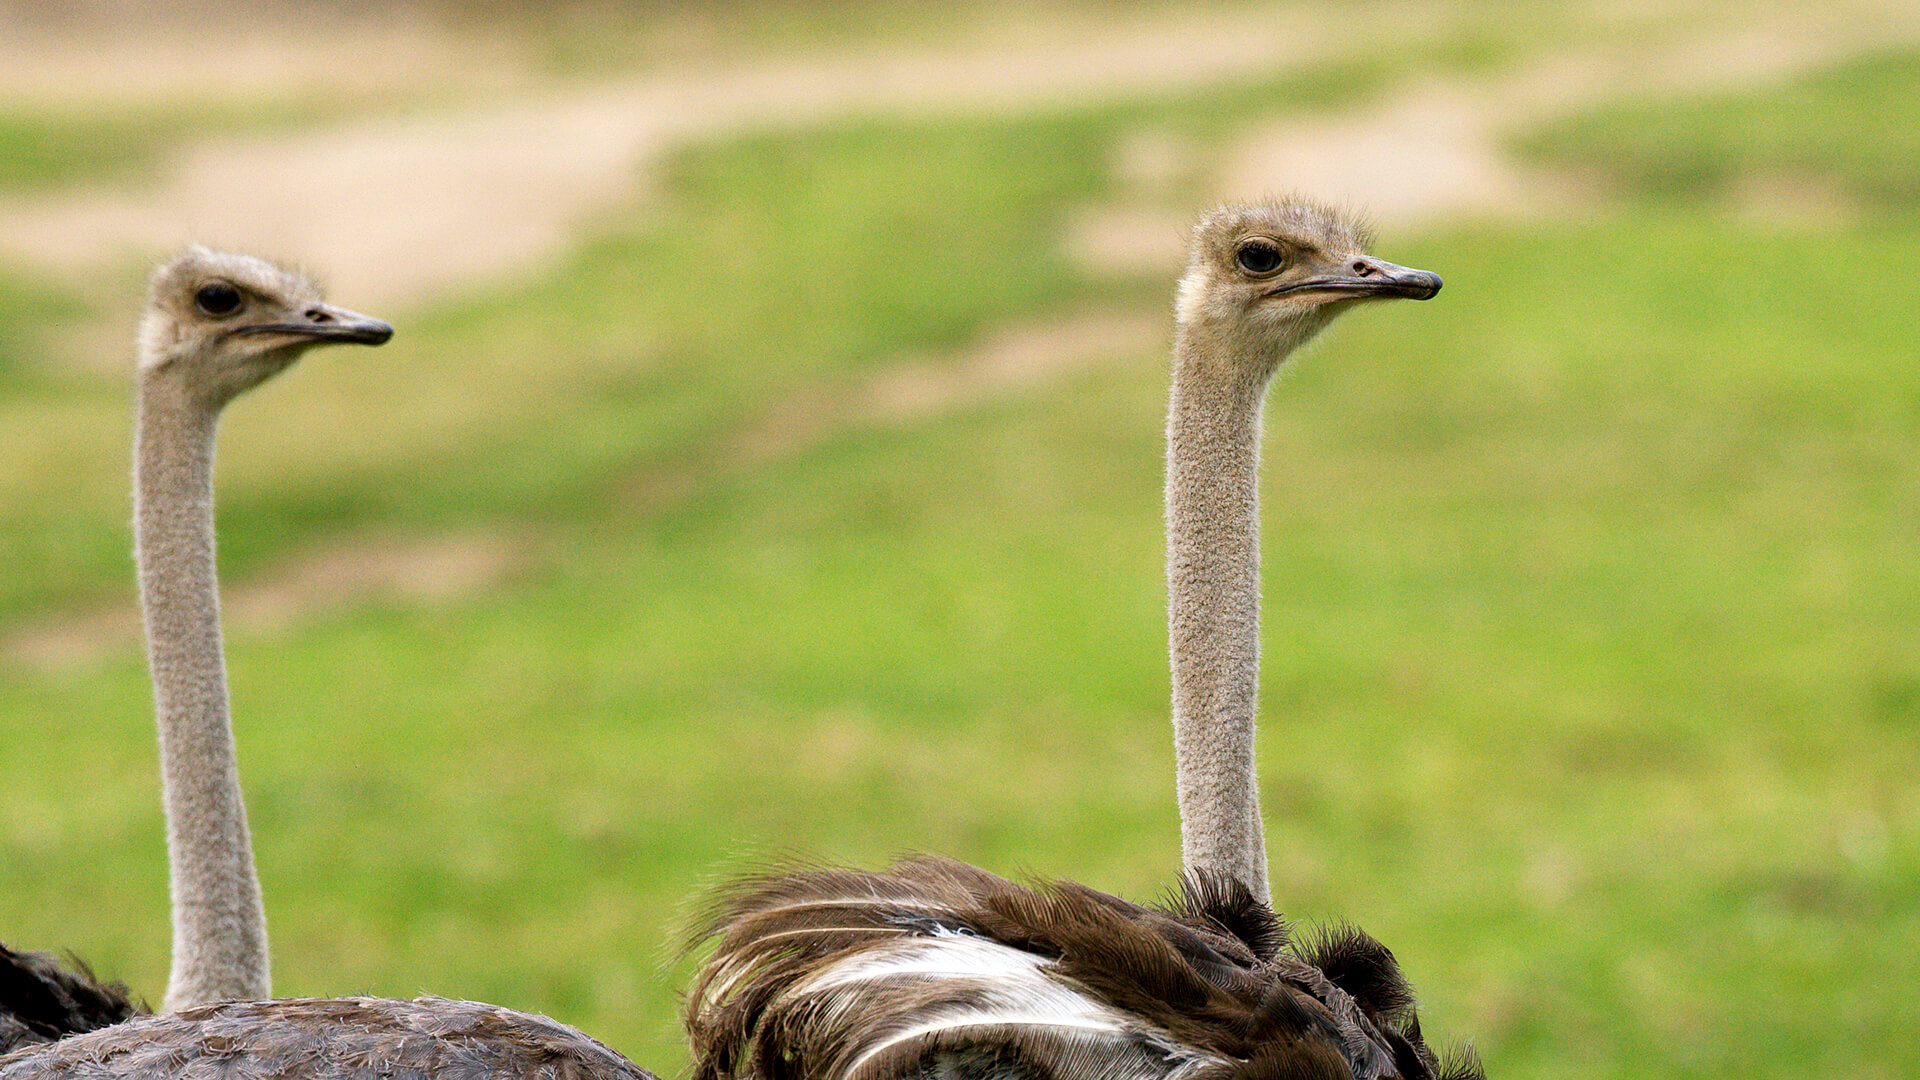 Ostrich wallpapers, Animal hq ostriches, Feathered giants, Wildlife photography, 1920x1080 Full HD Desktop